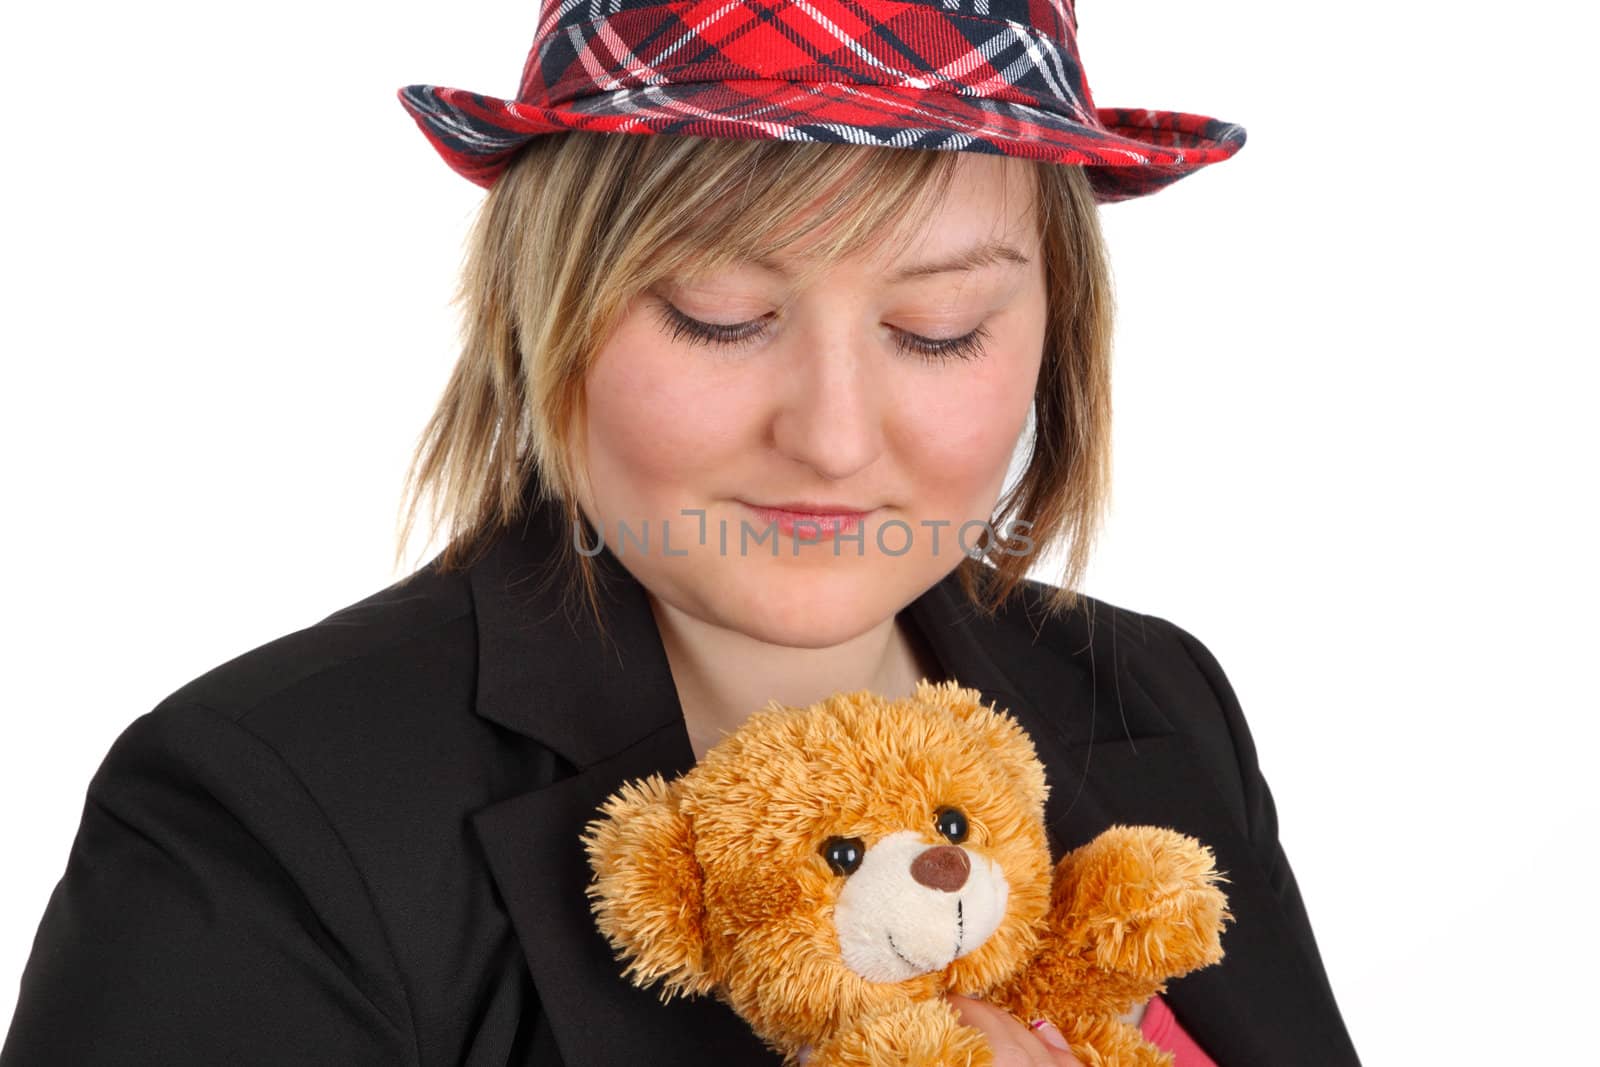 Young woman holding a teddy bear on white background